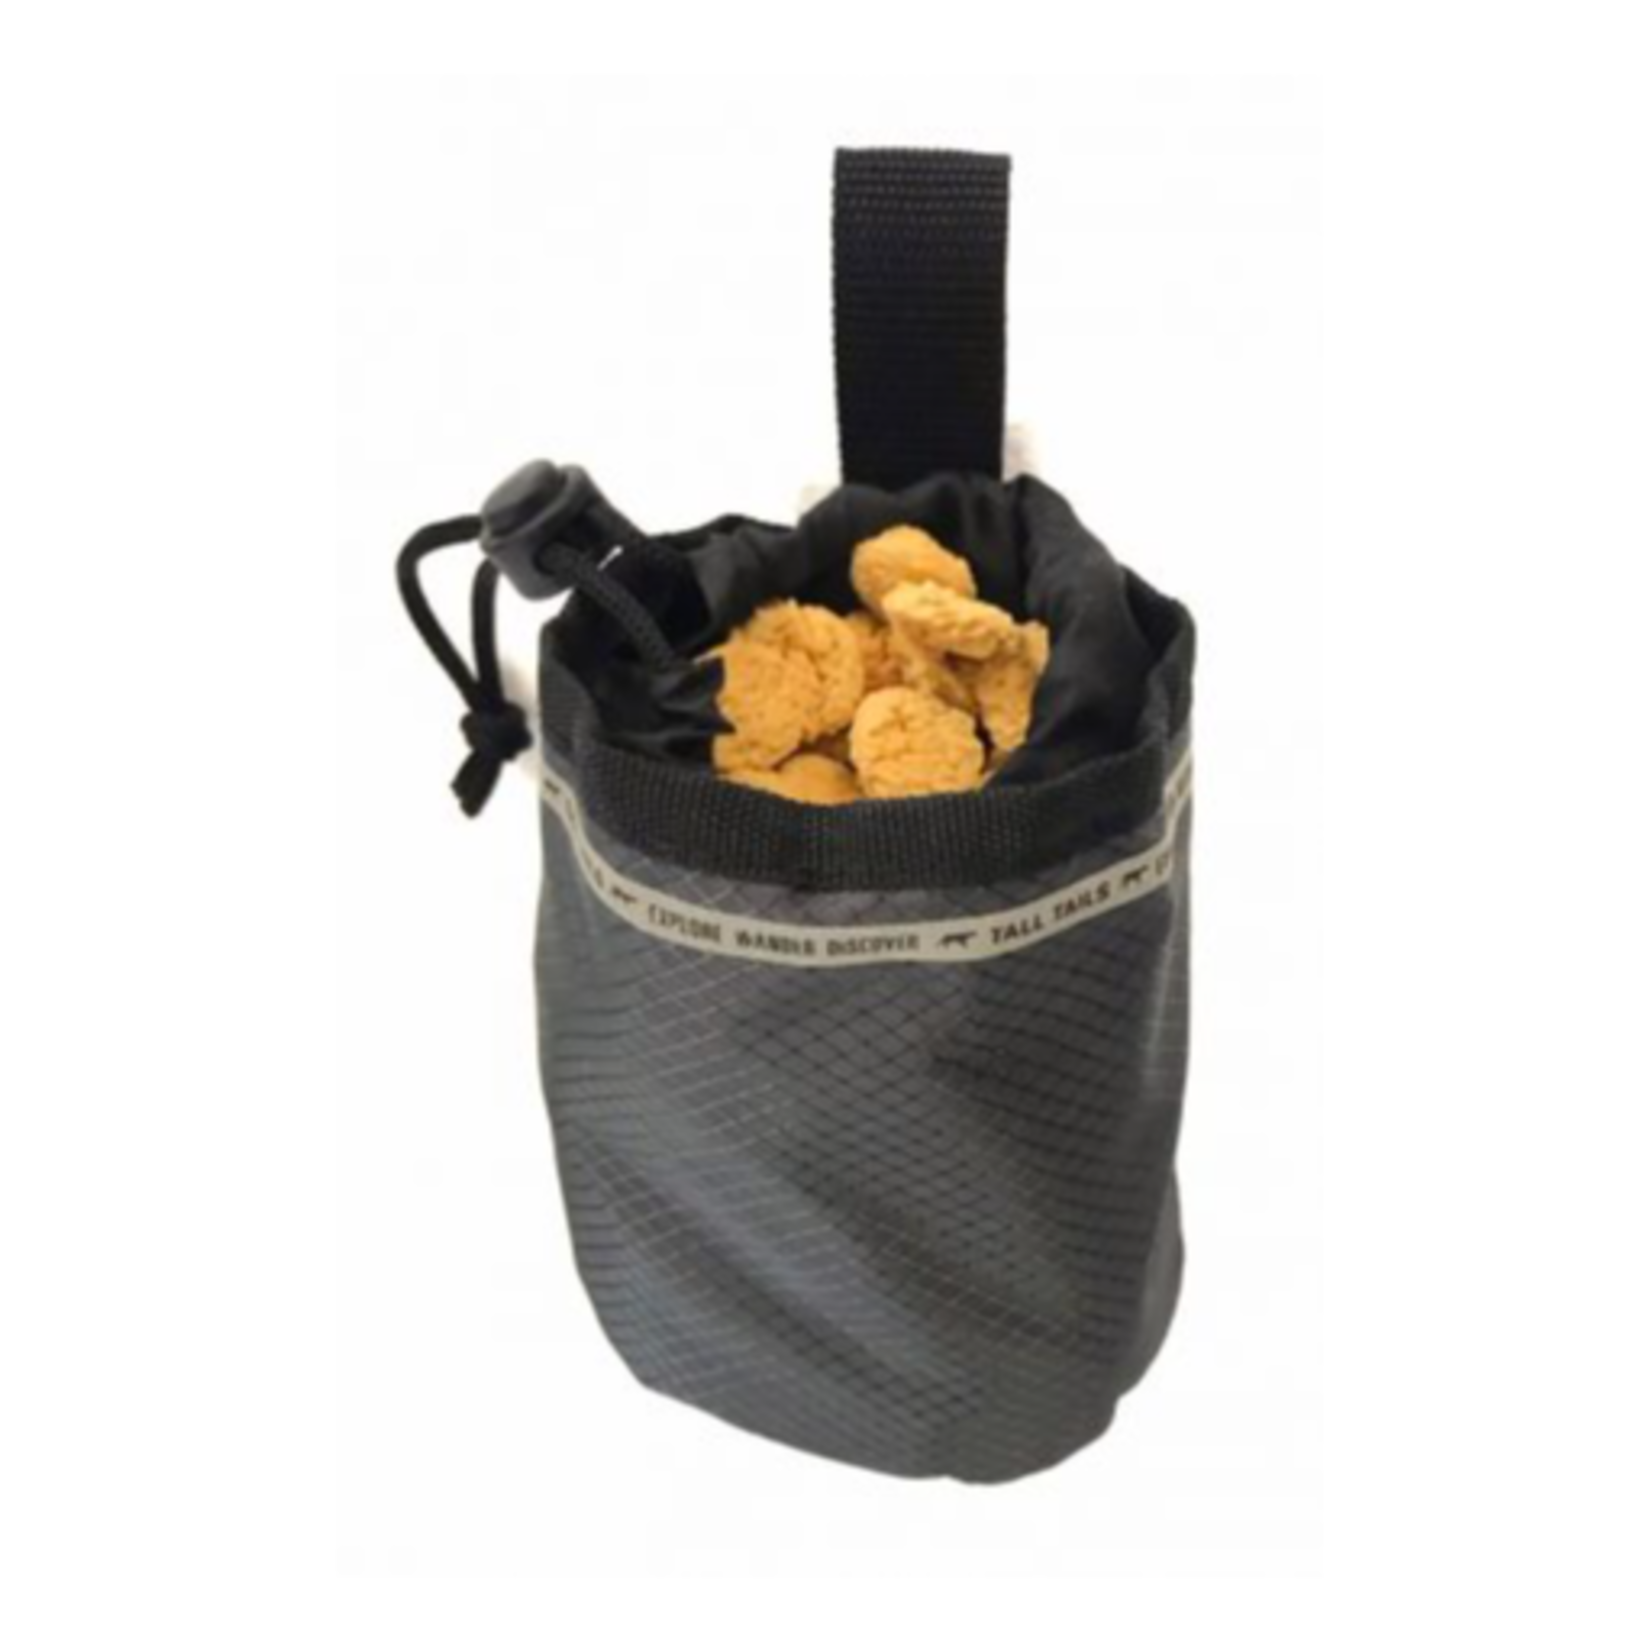 Tall Tails Treat Bag - 6 cups of food or liquid